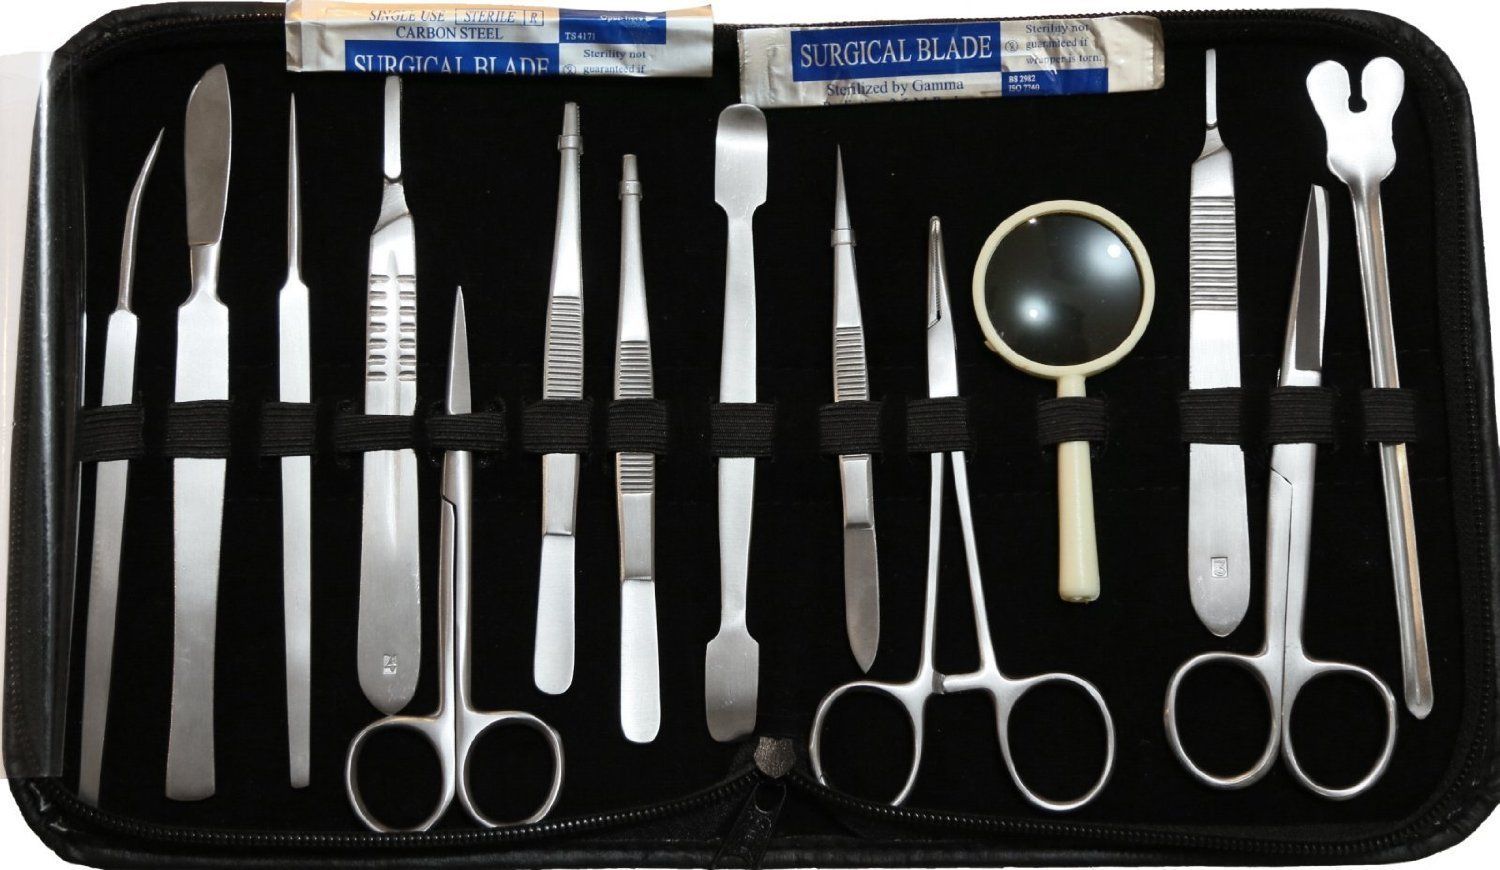 EASY TO CLEAN stainless steel instruments, INCLUDED SCALPEL BLADES so that you can get started immediately, QUALITY INSTRUMENTS help you complete your assignments quickly and efficiently •IDEAL FOR STUDENTS.